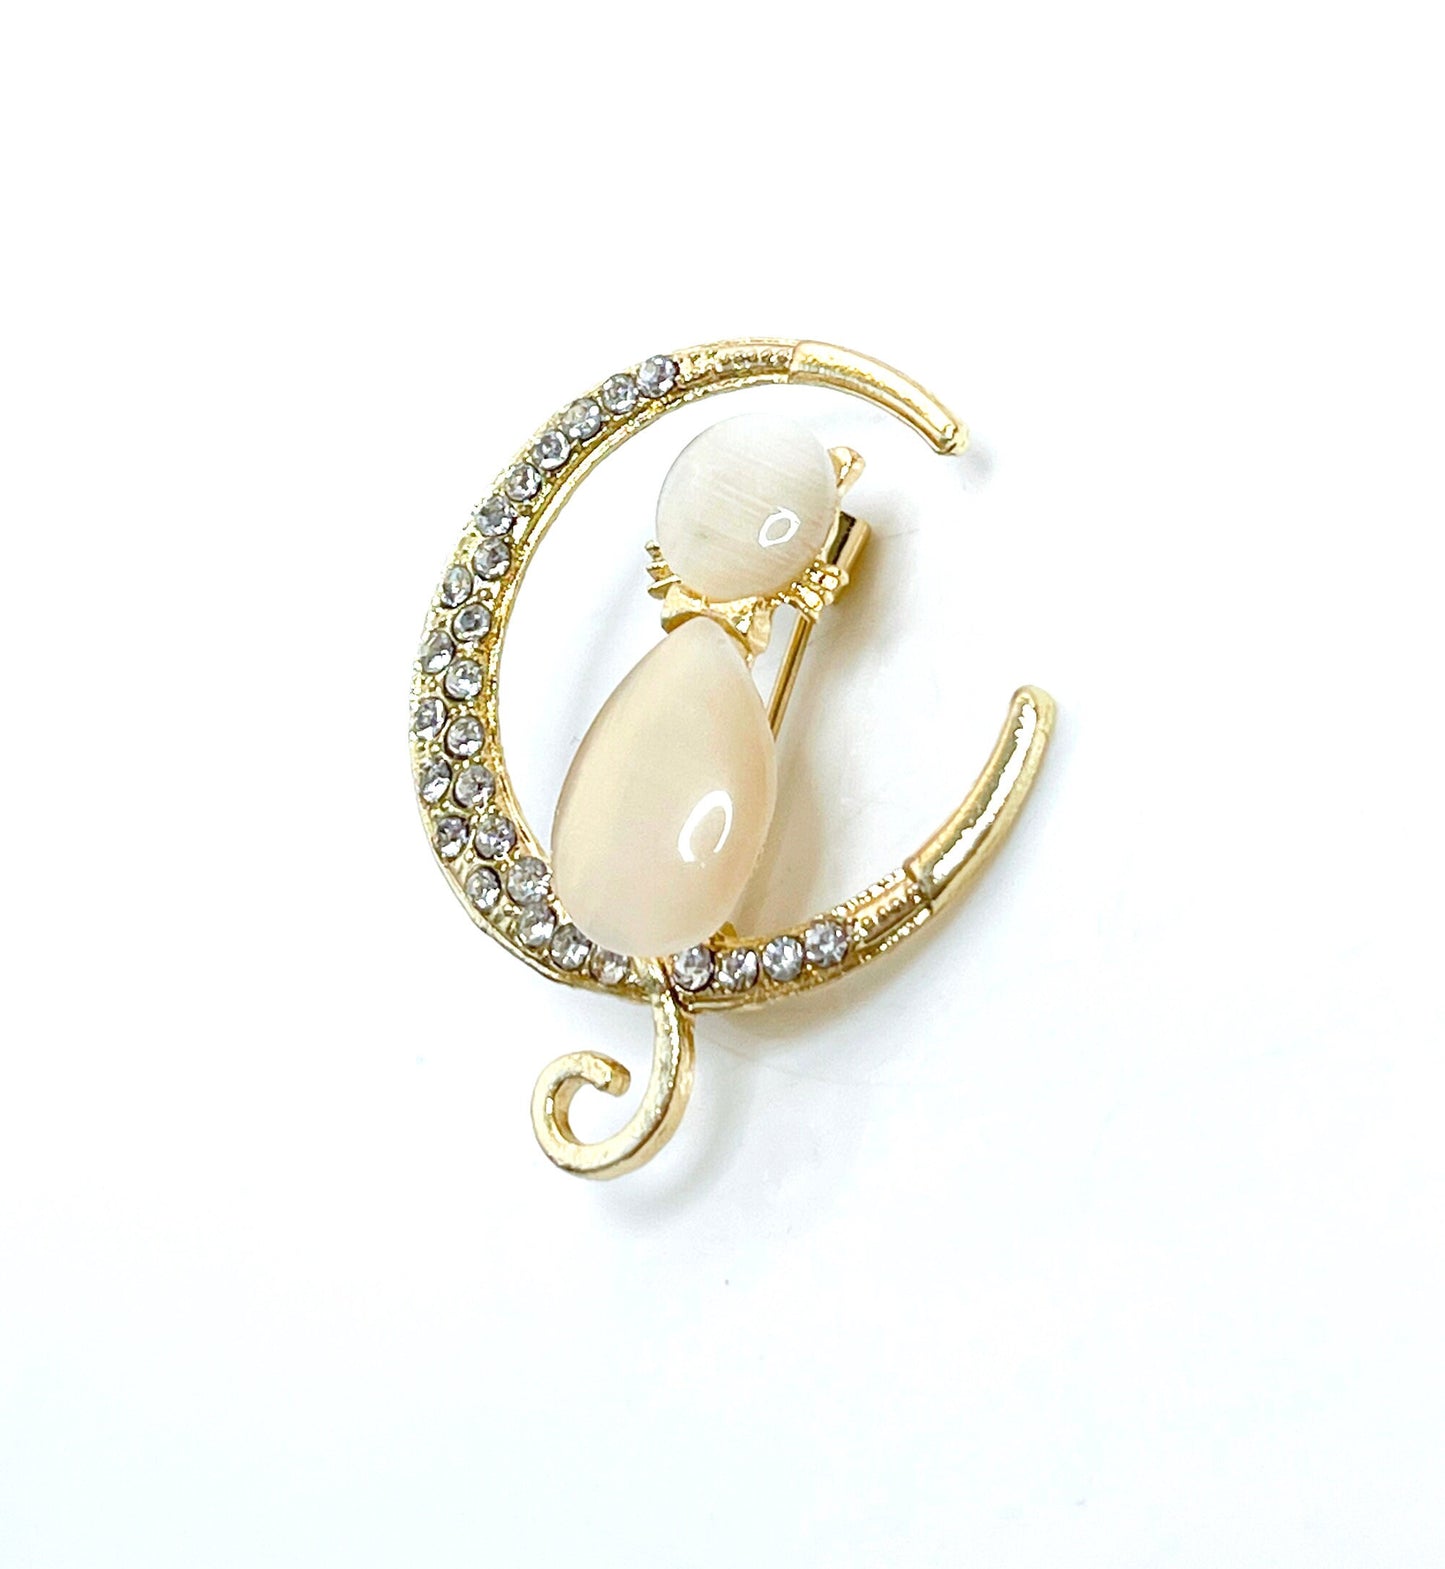 Gold Cat on the Moon Brooch, Opal Cat Pin, Dainty Crystal Cat Jewelry, Animal Lovers, Pet Lovers, Pin for Scarf Jacket, Brooch for Women